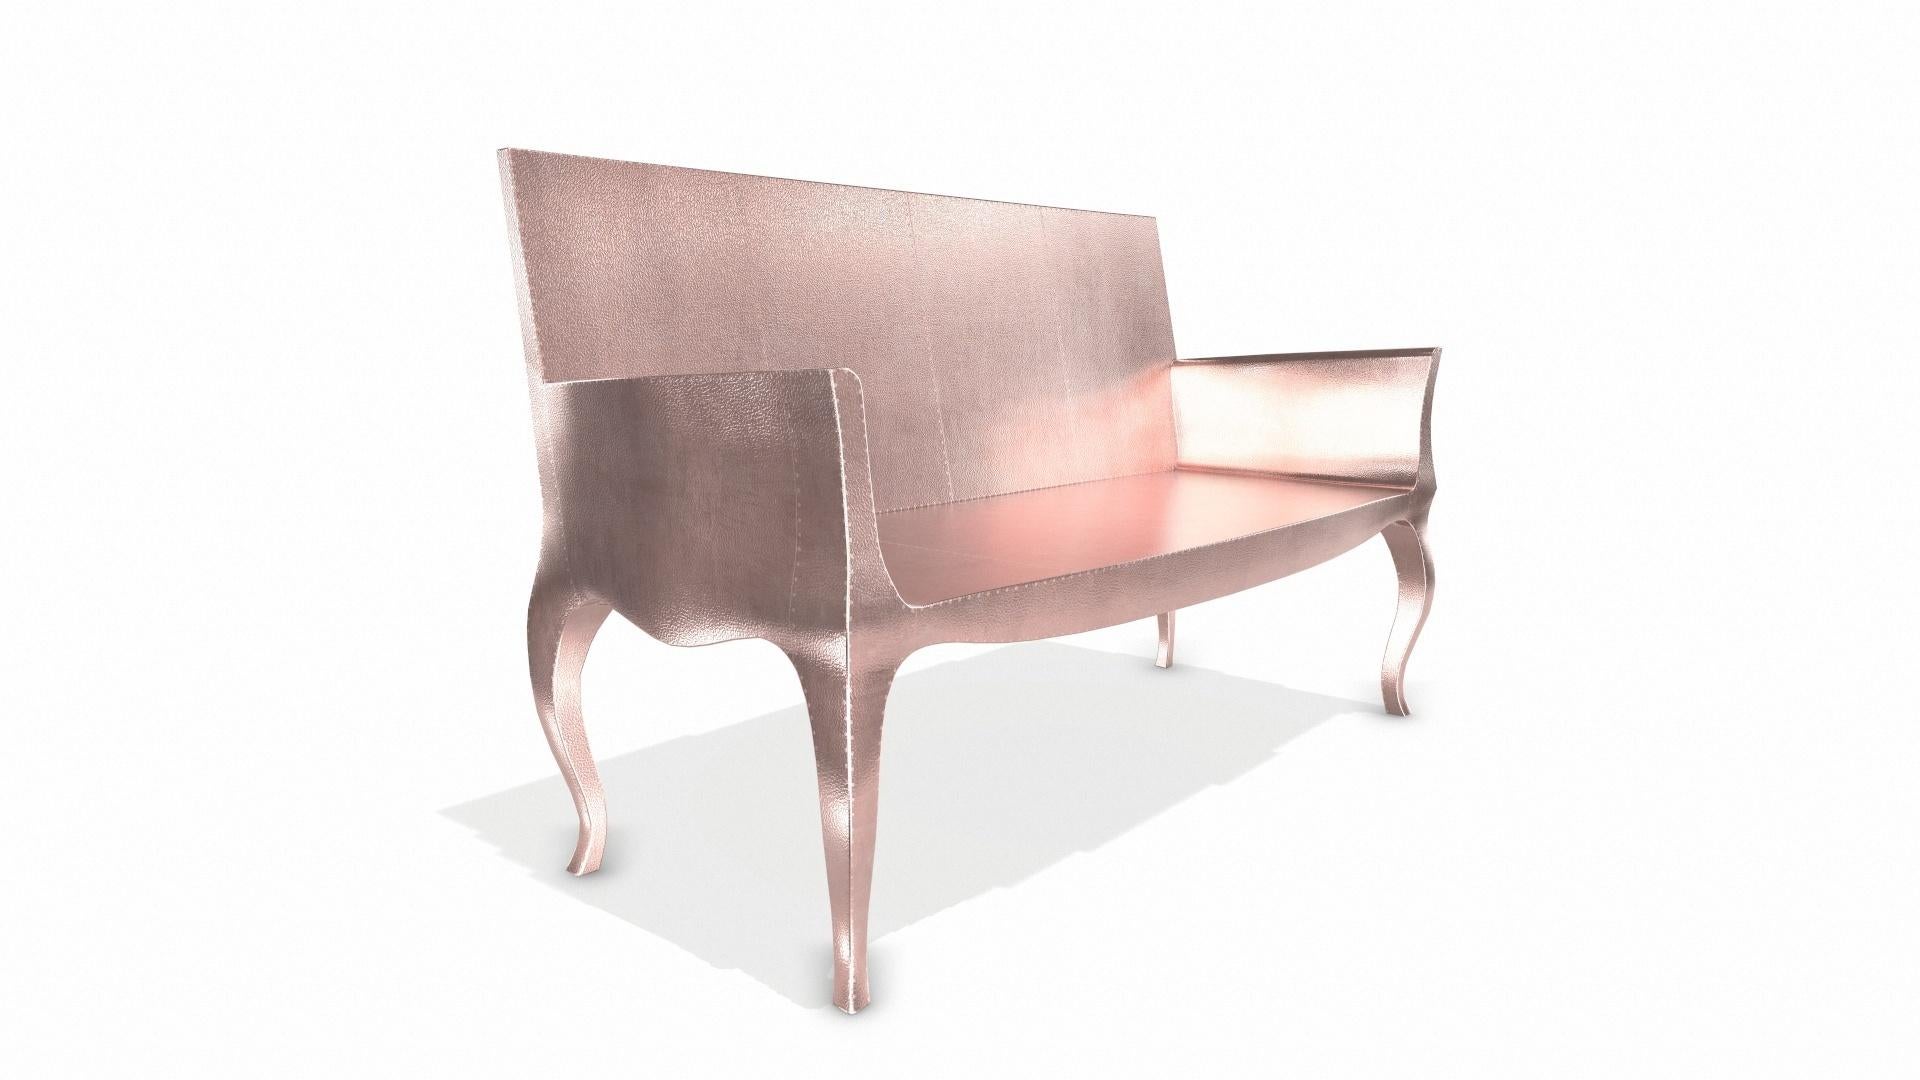 Louise Settee Art Deco Benches in Fine Hammered Copper by Paul Mathieu In New Condition For Sale In New York, NY